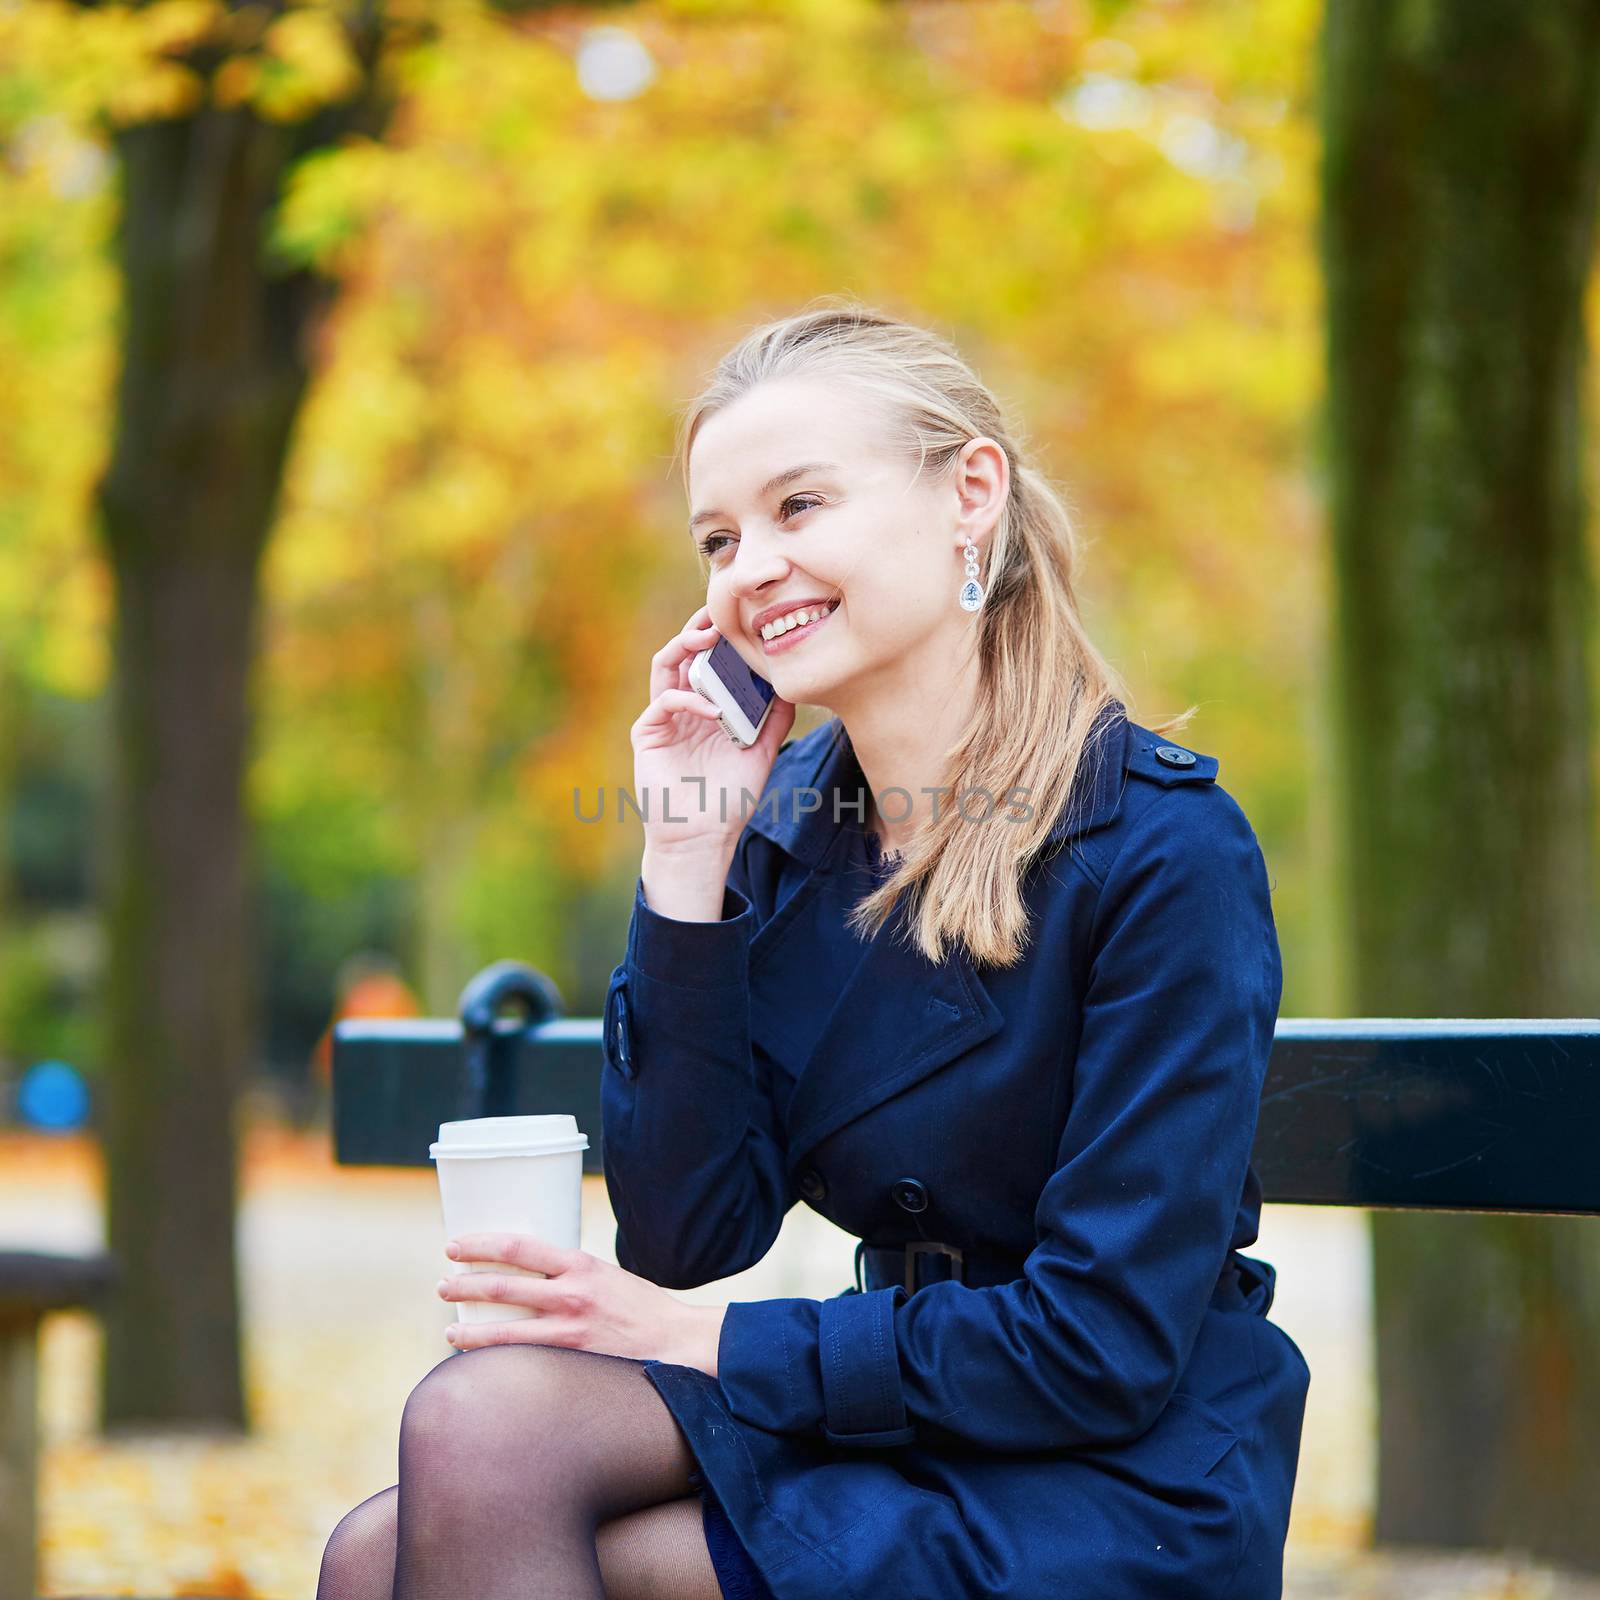 Beautiful young woman drinking coffee and speaking on the phone in the Luxembourg garden of Paris on a fall day